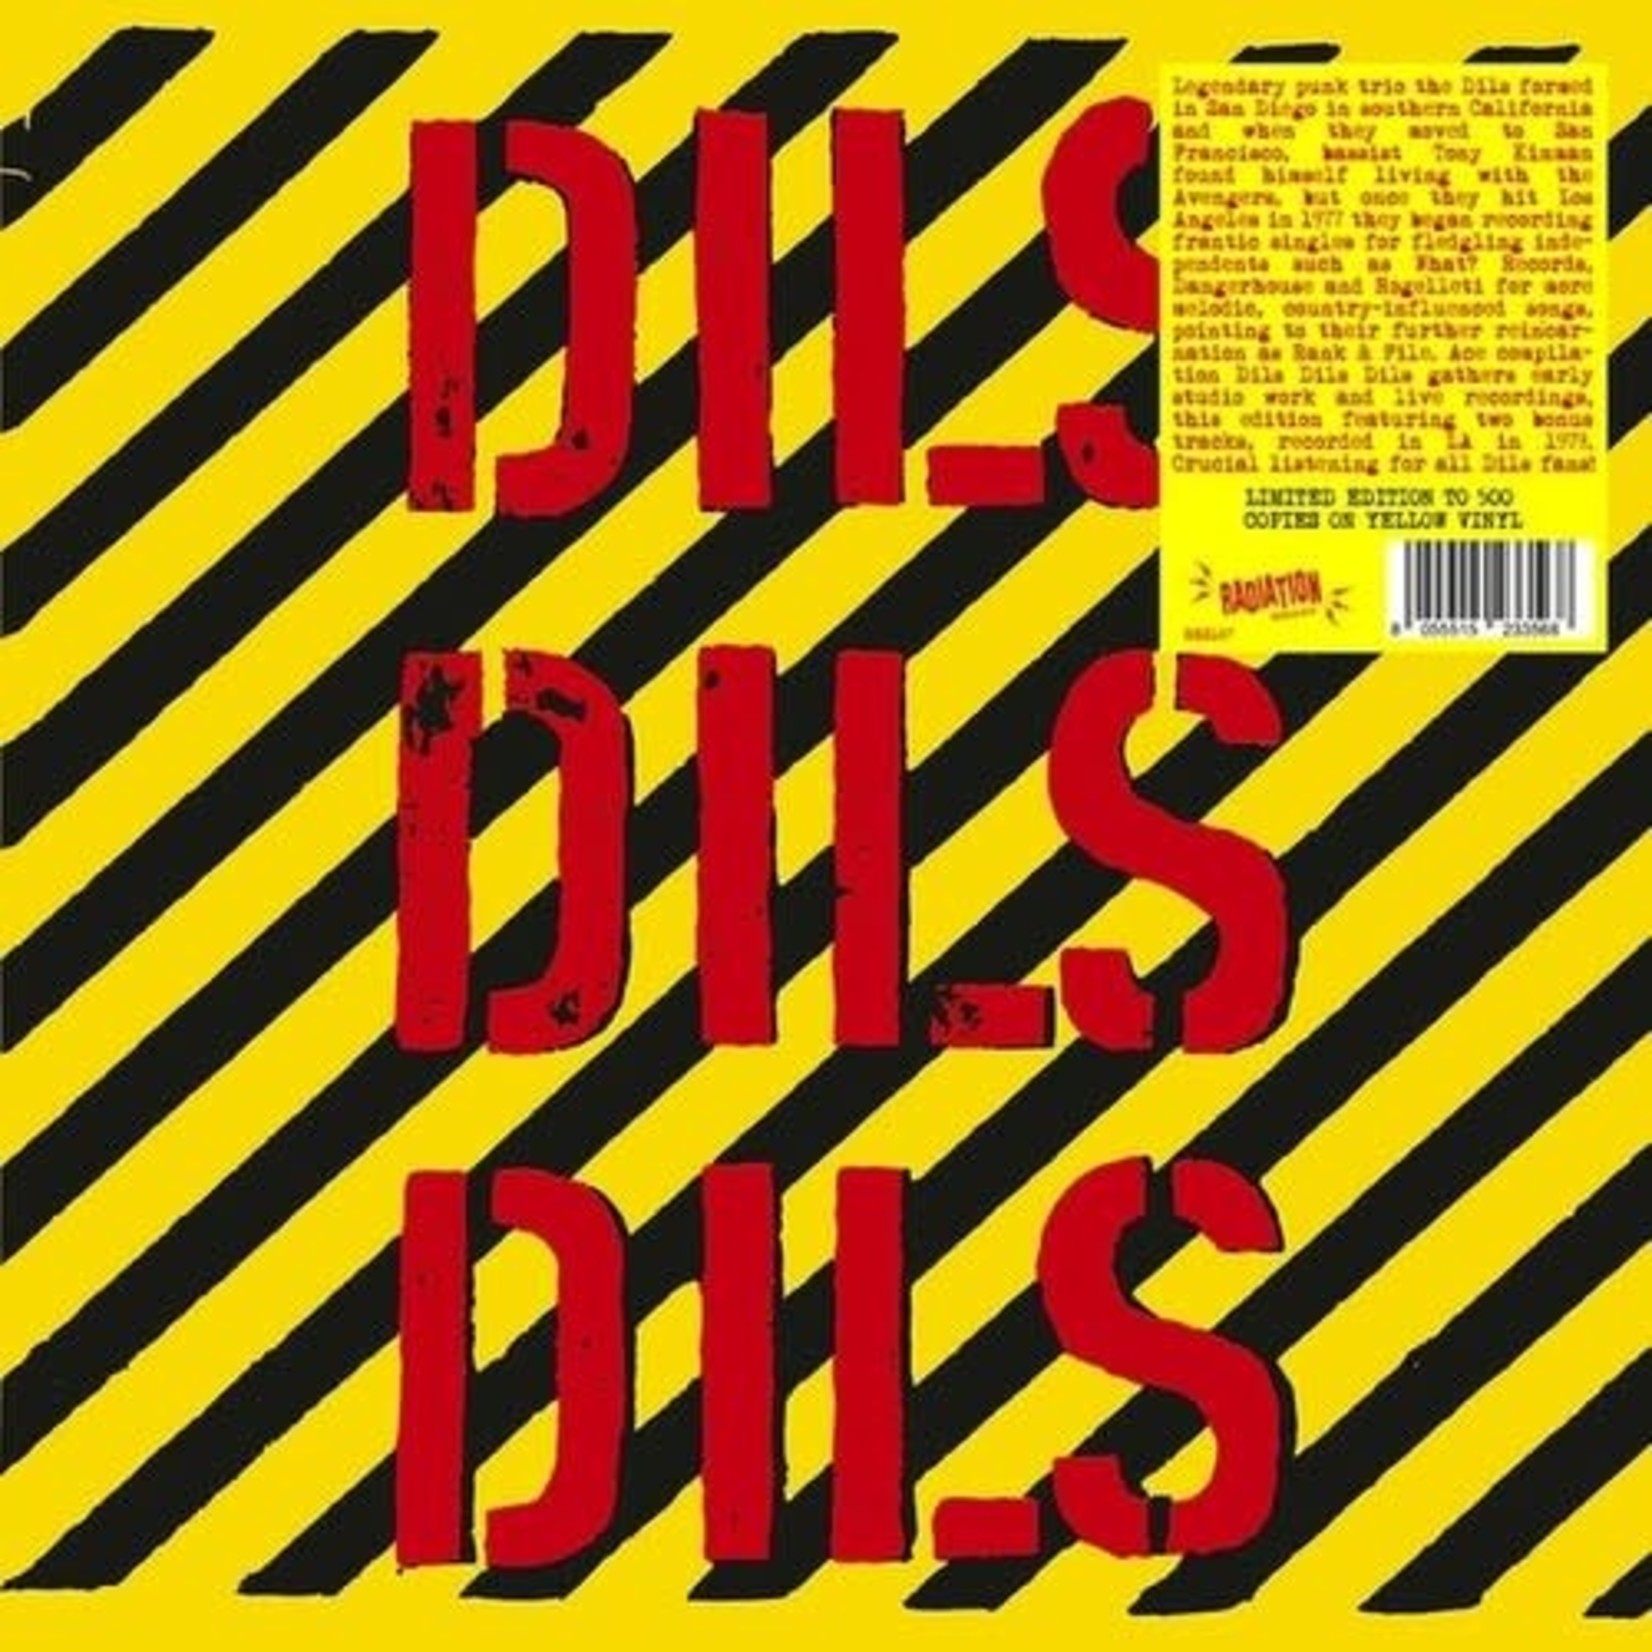 Radiation Dils - Dils Dils Dils (LP)